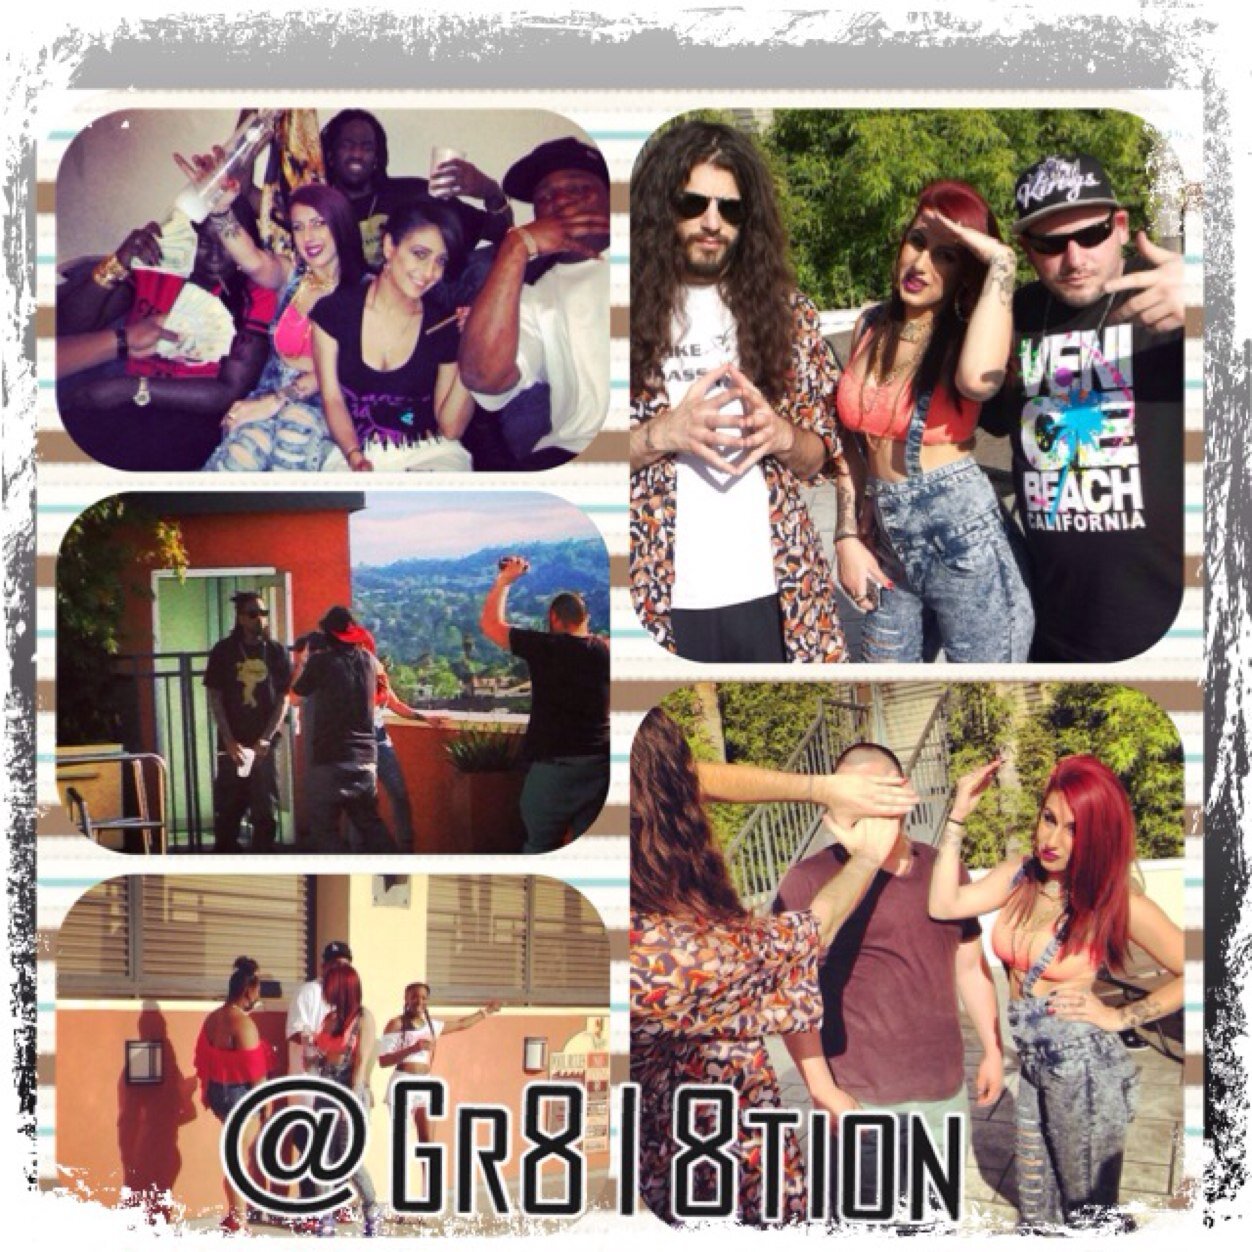 Discover some of the best photos and videos from the @Gr818tion Music Group on #instagram http://t.co/gsN87KPCnZ | http://t.co/NupYwyvXji |